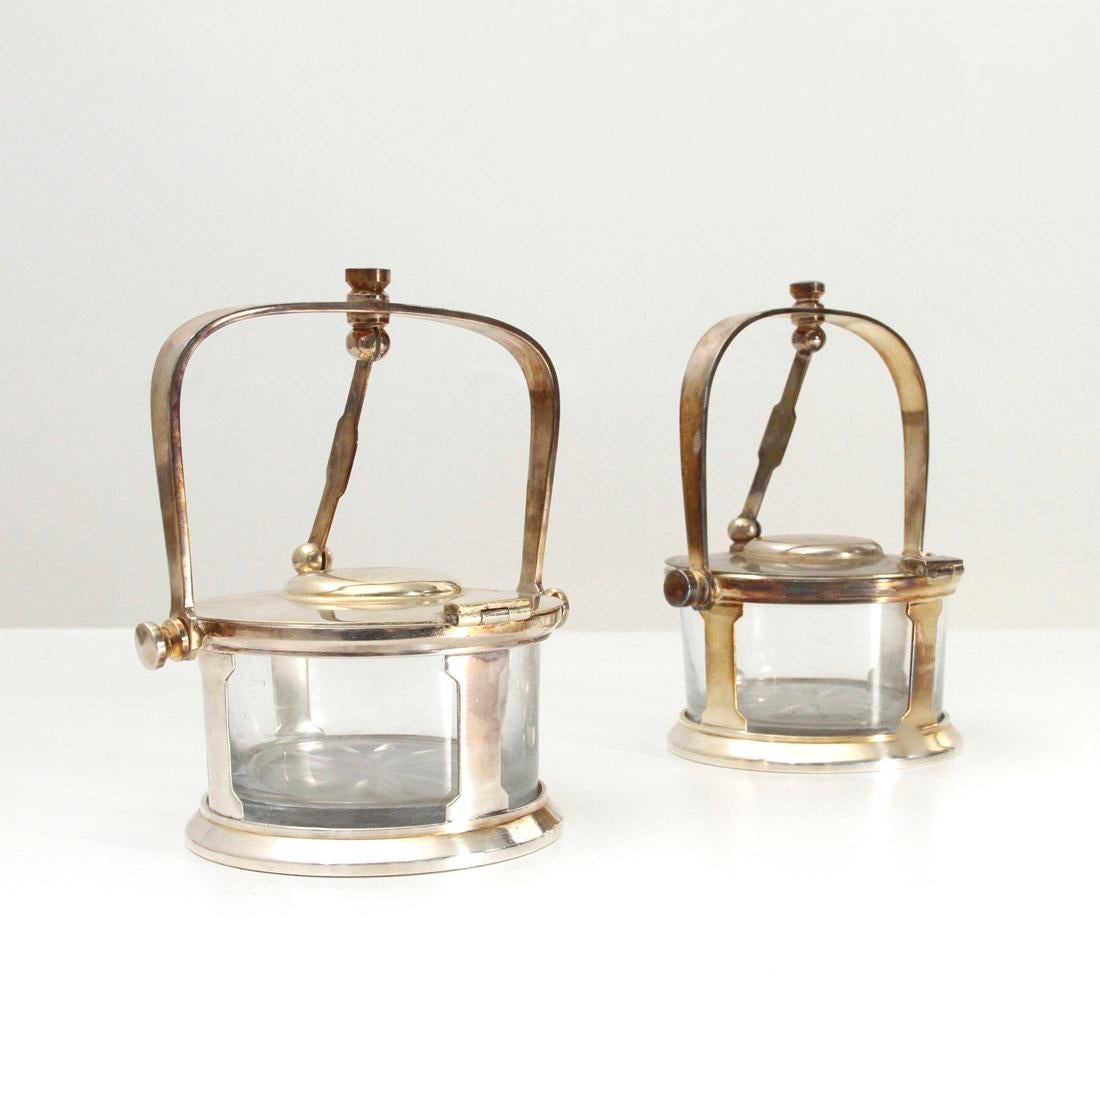 Pair of Parmesan cheese cellar produced by Fratelli Calderoni in the 1930s.
Silver alpaca structure.
Glass container with floral decoration.
Automatic lid opening by folding the handle.
Good general conditions, some signs due to normal use over